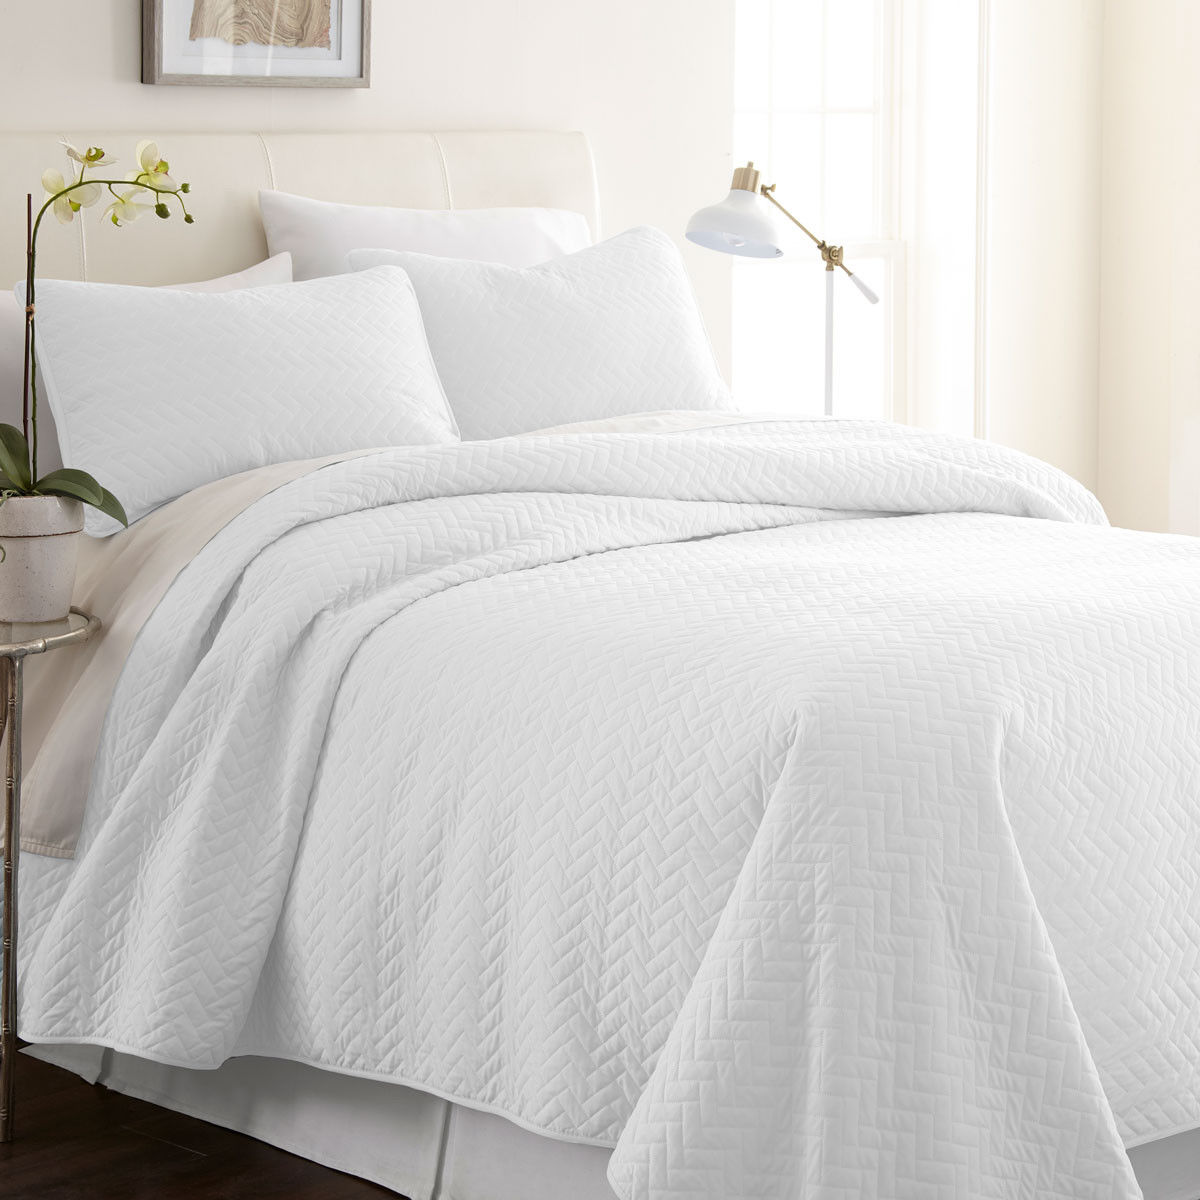 How should I care for my 3-Piece Herring Quilted Coverlet Set?